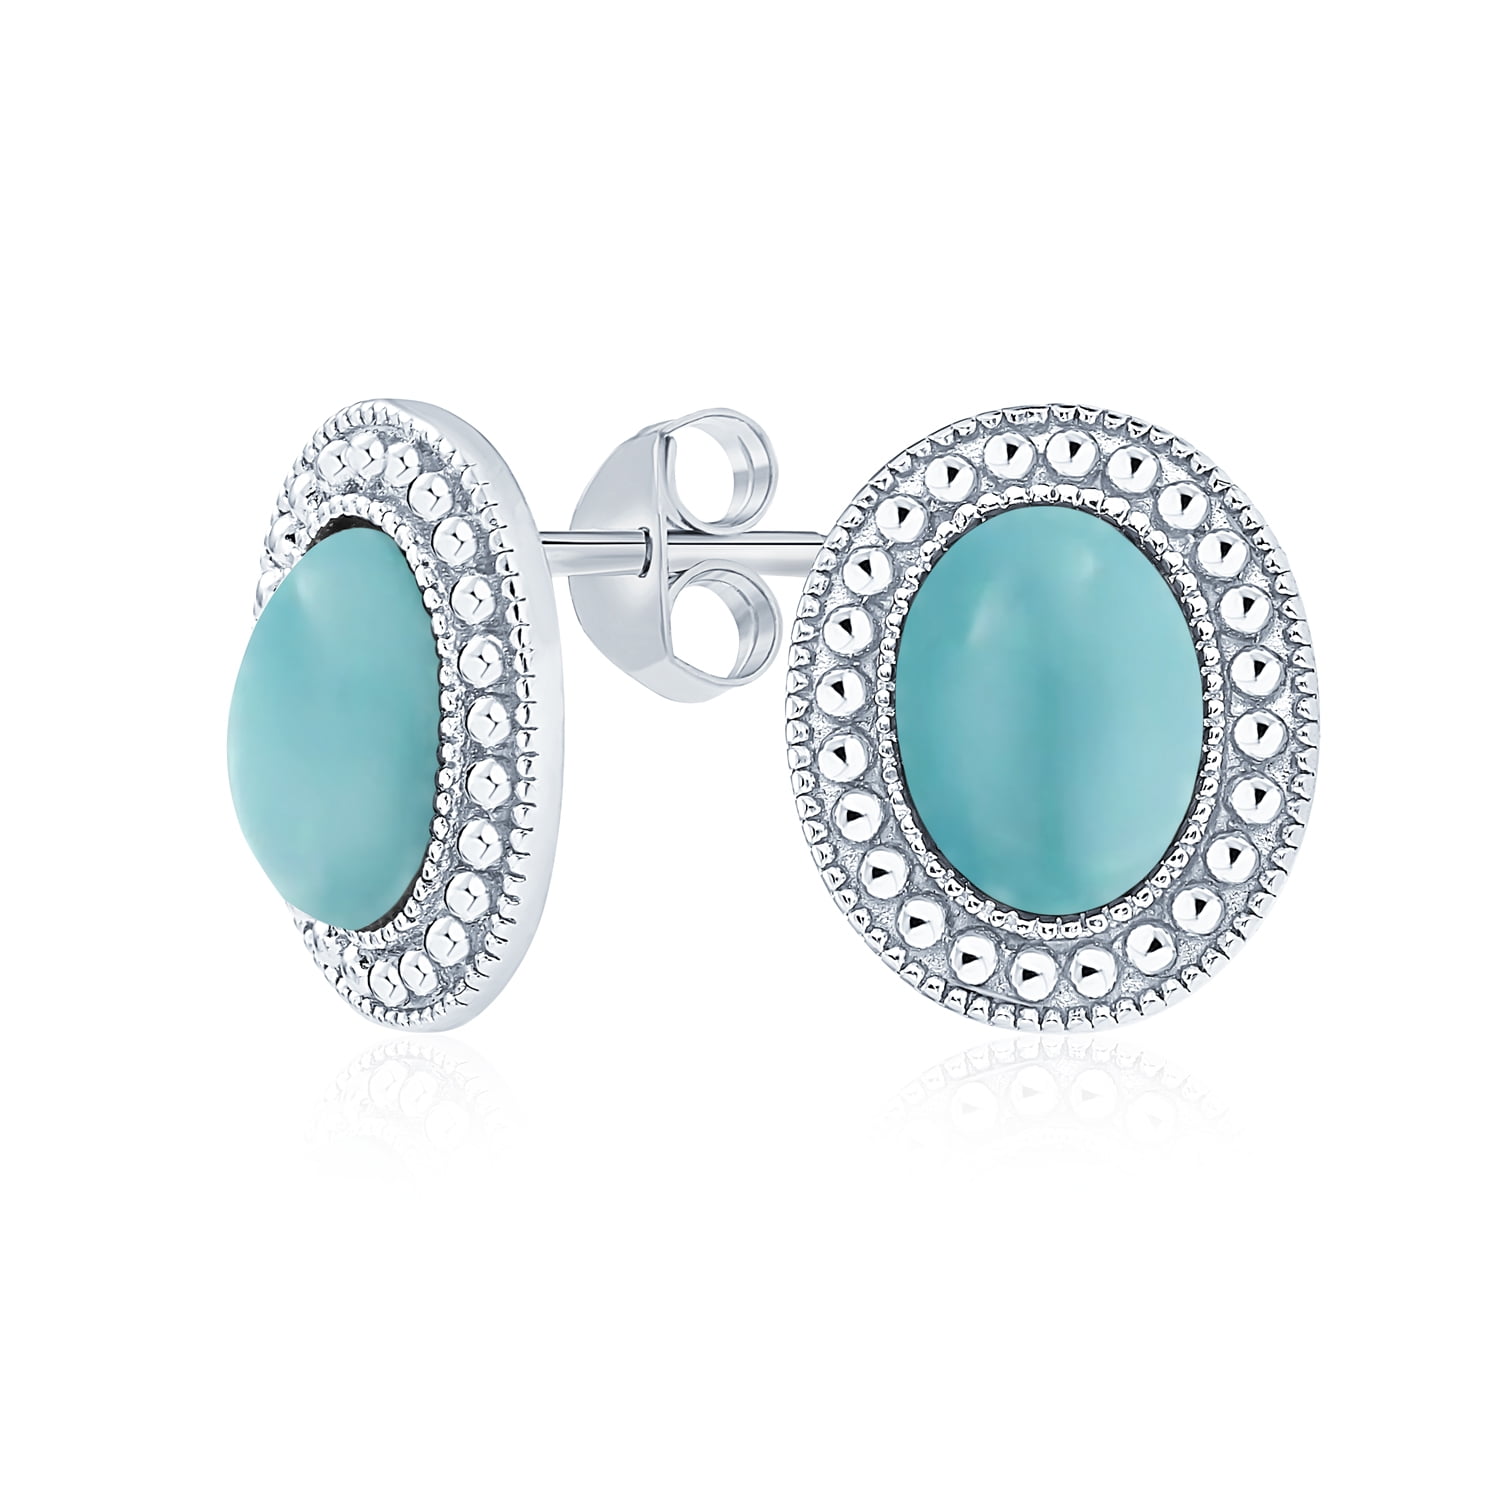 SPARKLING TURQUOISE CZ 8mm .925 STERLING SILVER STUD EARRINGS w Gift Box 